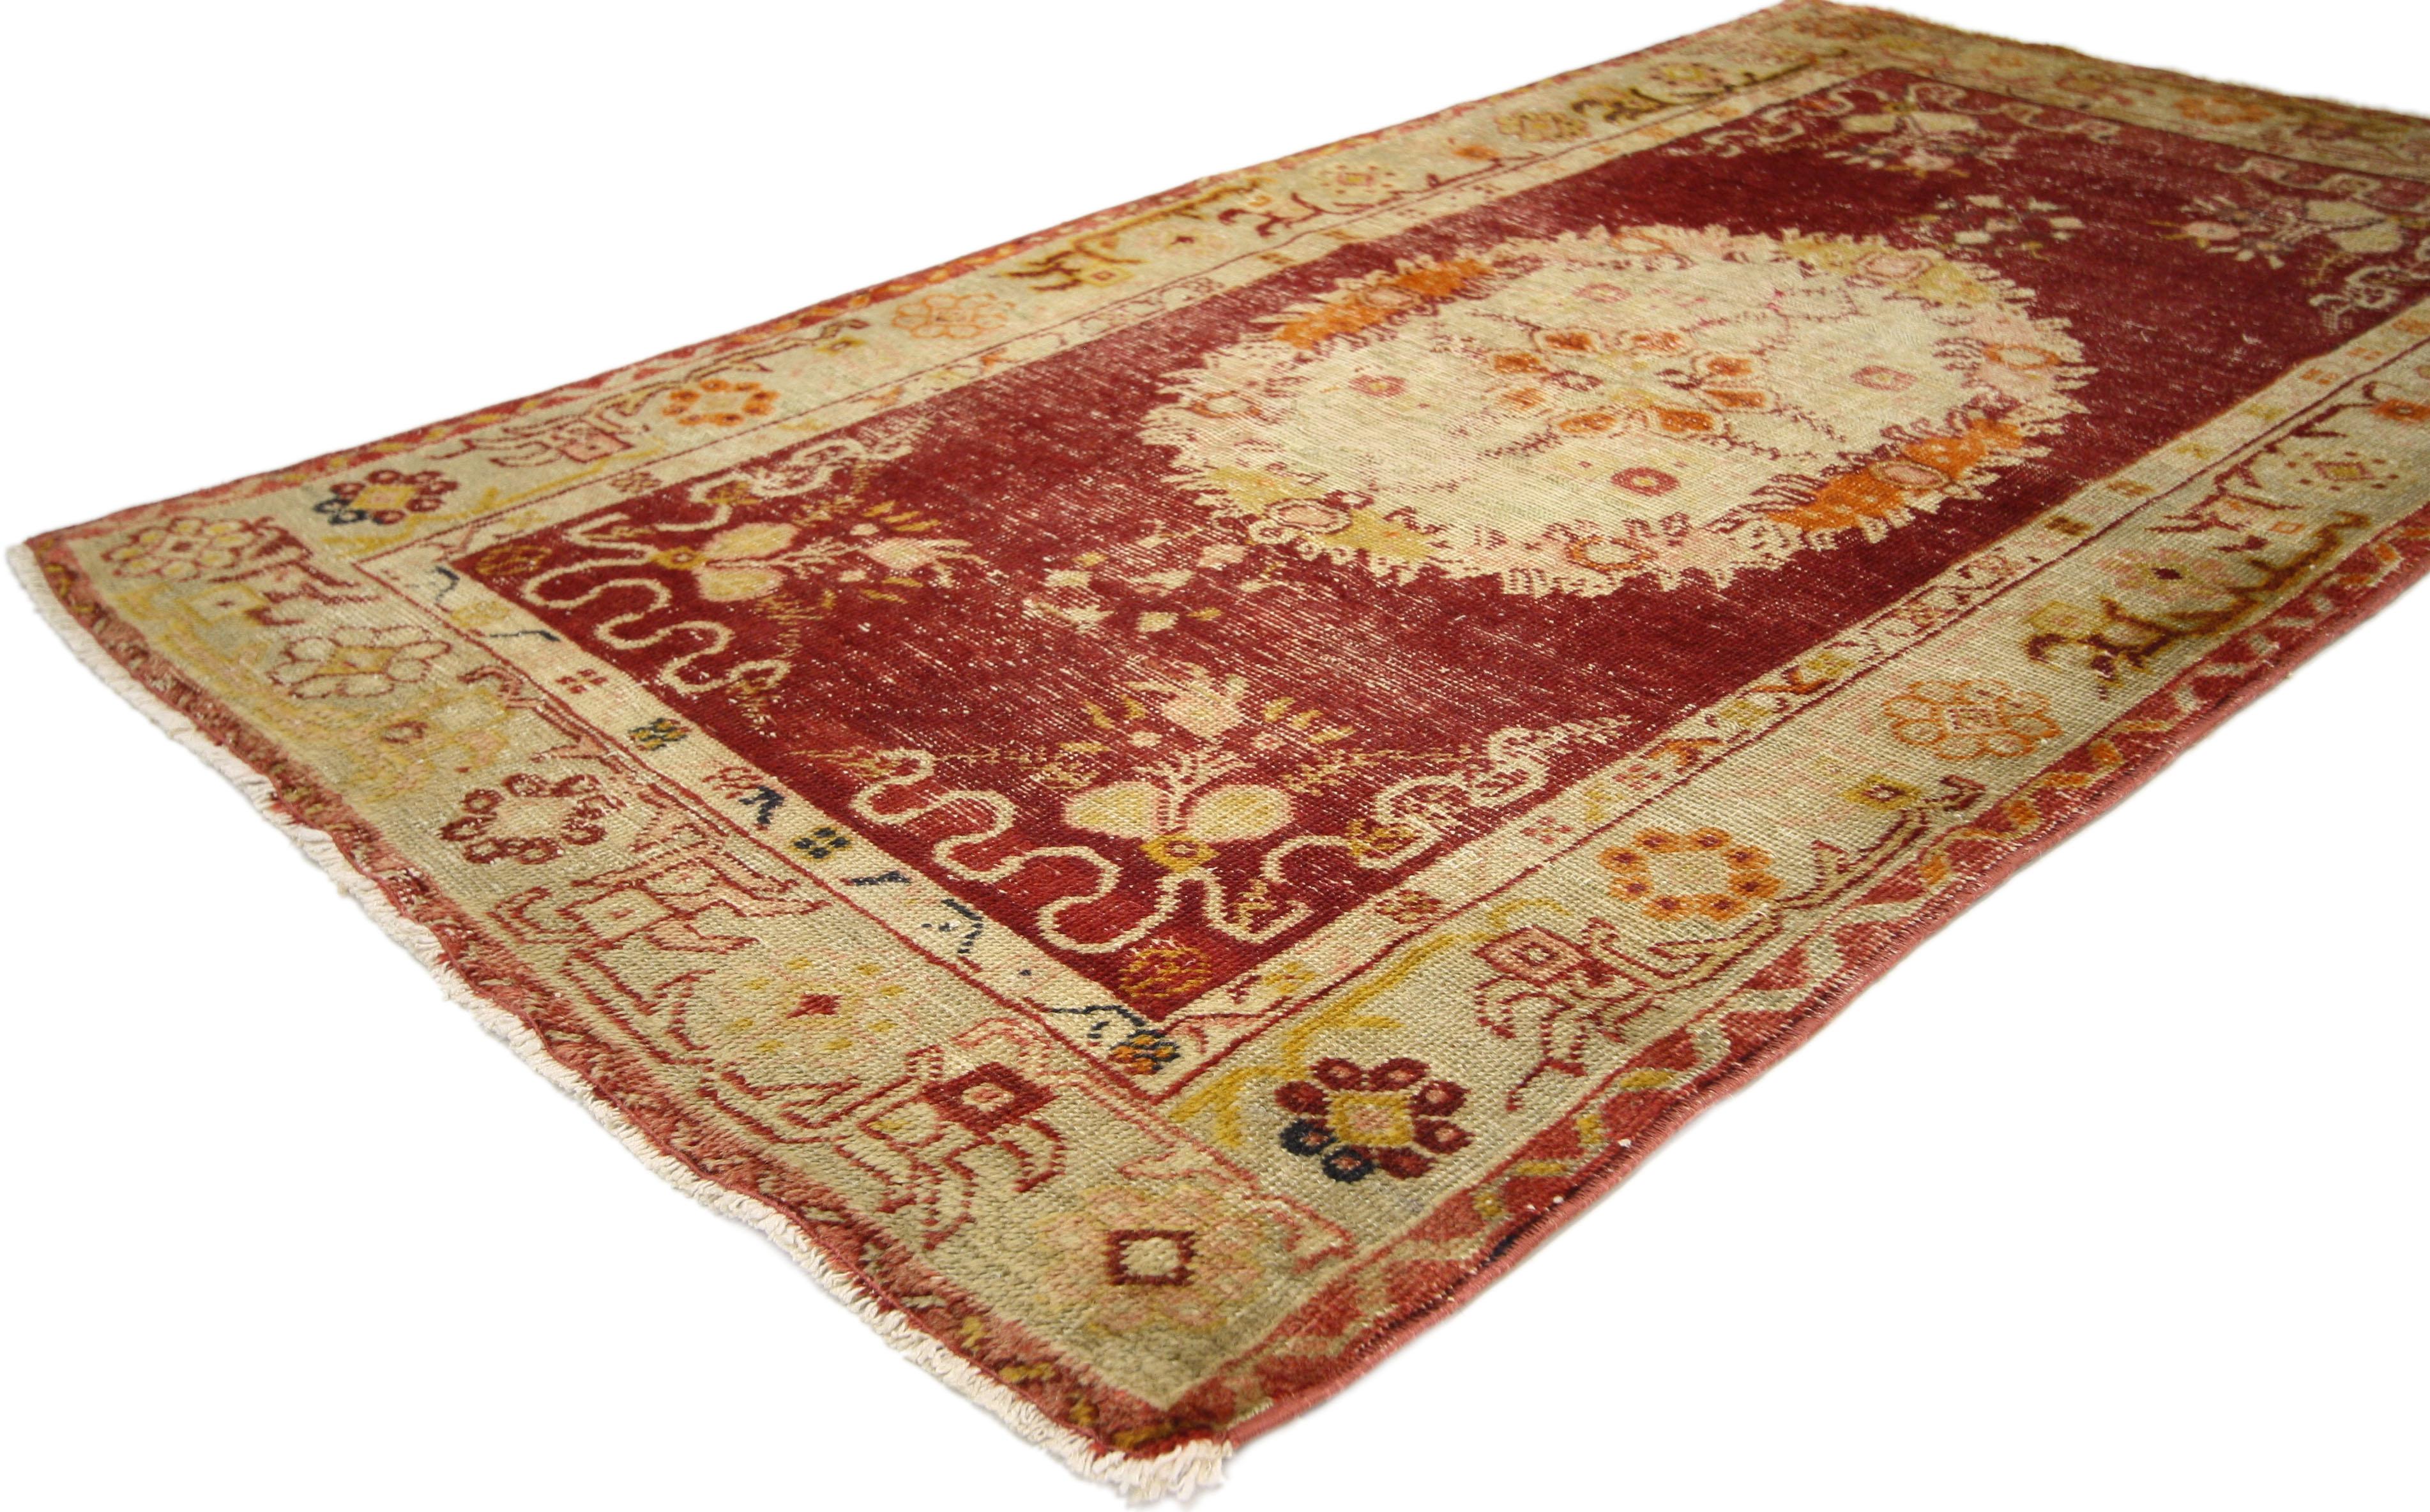 52343, rustic style distressed vintage Turkish Oushak rug. This hand knotted wool vintage Turkish Oushak rug features a large floral oval centre medallion with vase pendants across an abrashed scarlet red field. Delicate cloud bands accentuate the